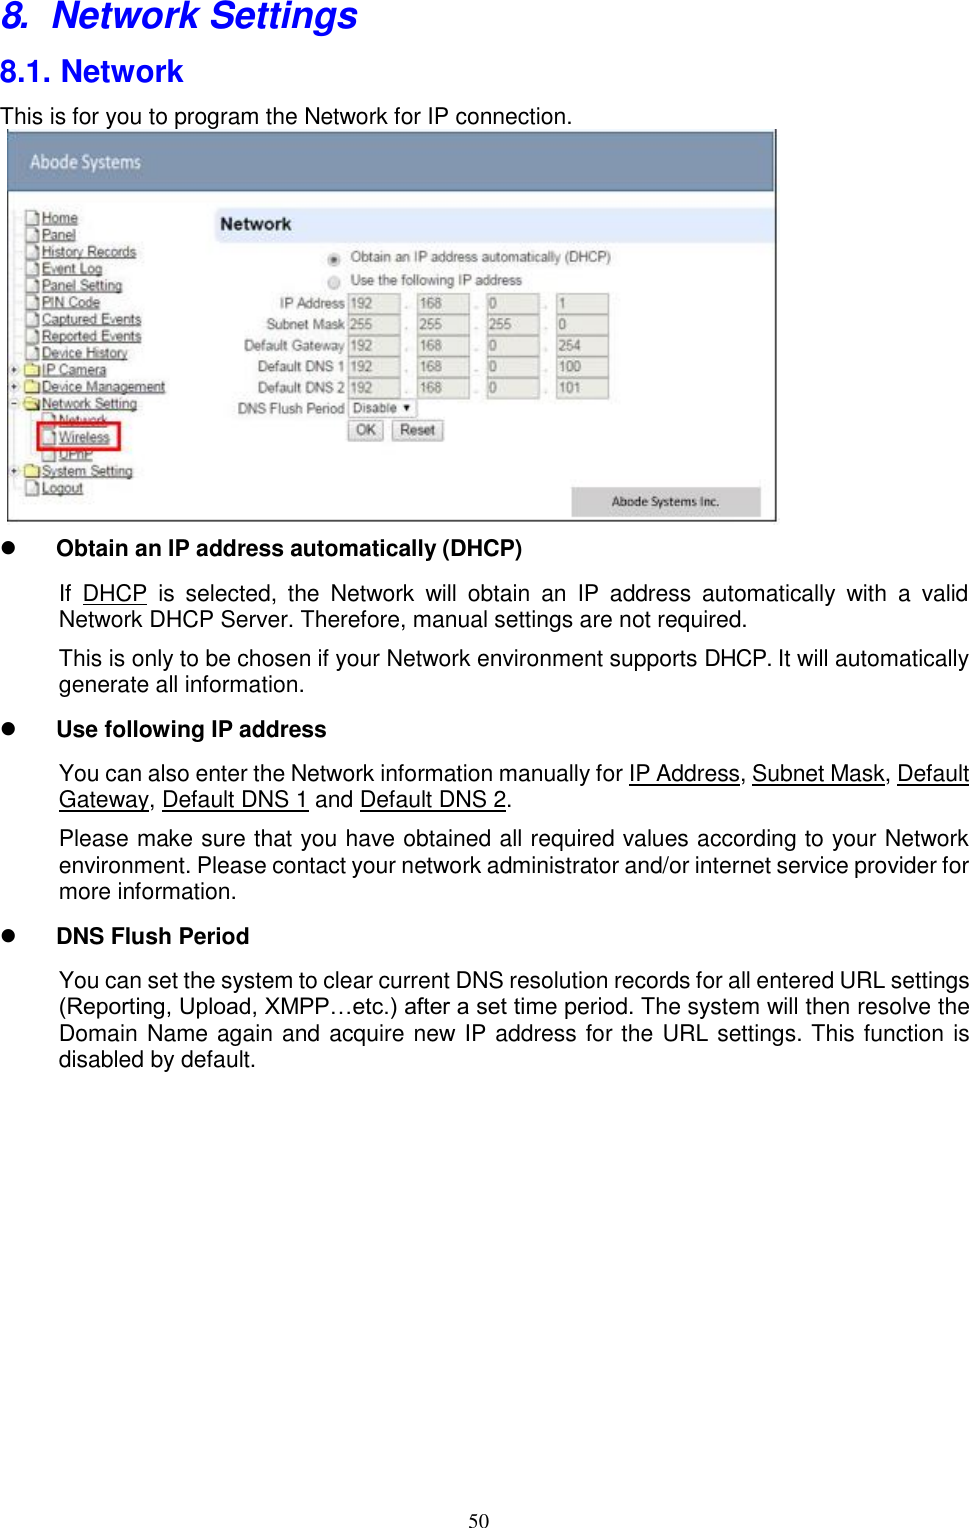 50  8. Network Settings 8.1. Network This is for you to program the Network for IP connection.                Obtain an IP address automatically (DHCP)If  DHCP  is  selected,  the  Network  will  obtain  an  IP  address  automatically  with  a  valid Network DHCP Server. Therefore, manual settings are not required. This is only to be chosen if your Network environment supports DHCP. It will automatically generate all information.  Use following IP addressYou can also enter the Network information manually for IP Address, Subnet Mask, Default Gateway, Default DNS 1 and Default DNS 2. Please make sure that you have obtained all required values according to your Network environment. Please contact your network administrator and/or internet service provider for more information.  DNS Flush PeriodYou can set the system to clear current DNS resolution records for all entered URL settings (Reporting, Upload, XMPP…etc.) after a set time period. The system will then resolve the Domain Name again and acquire new IP address for the URL settings. This function is disabled by default. 